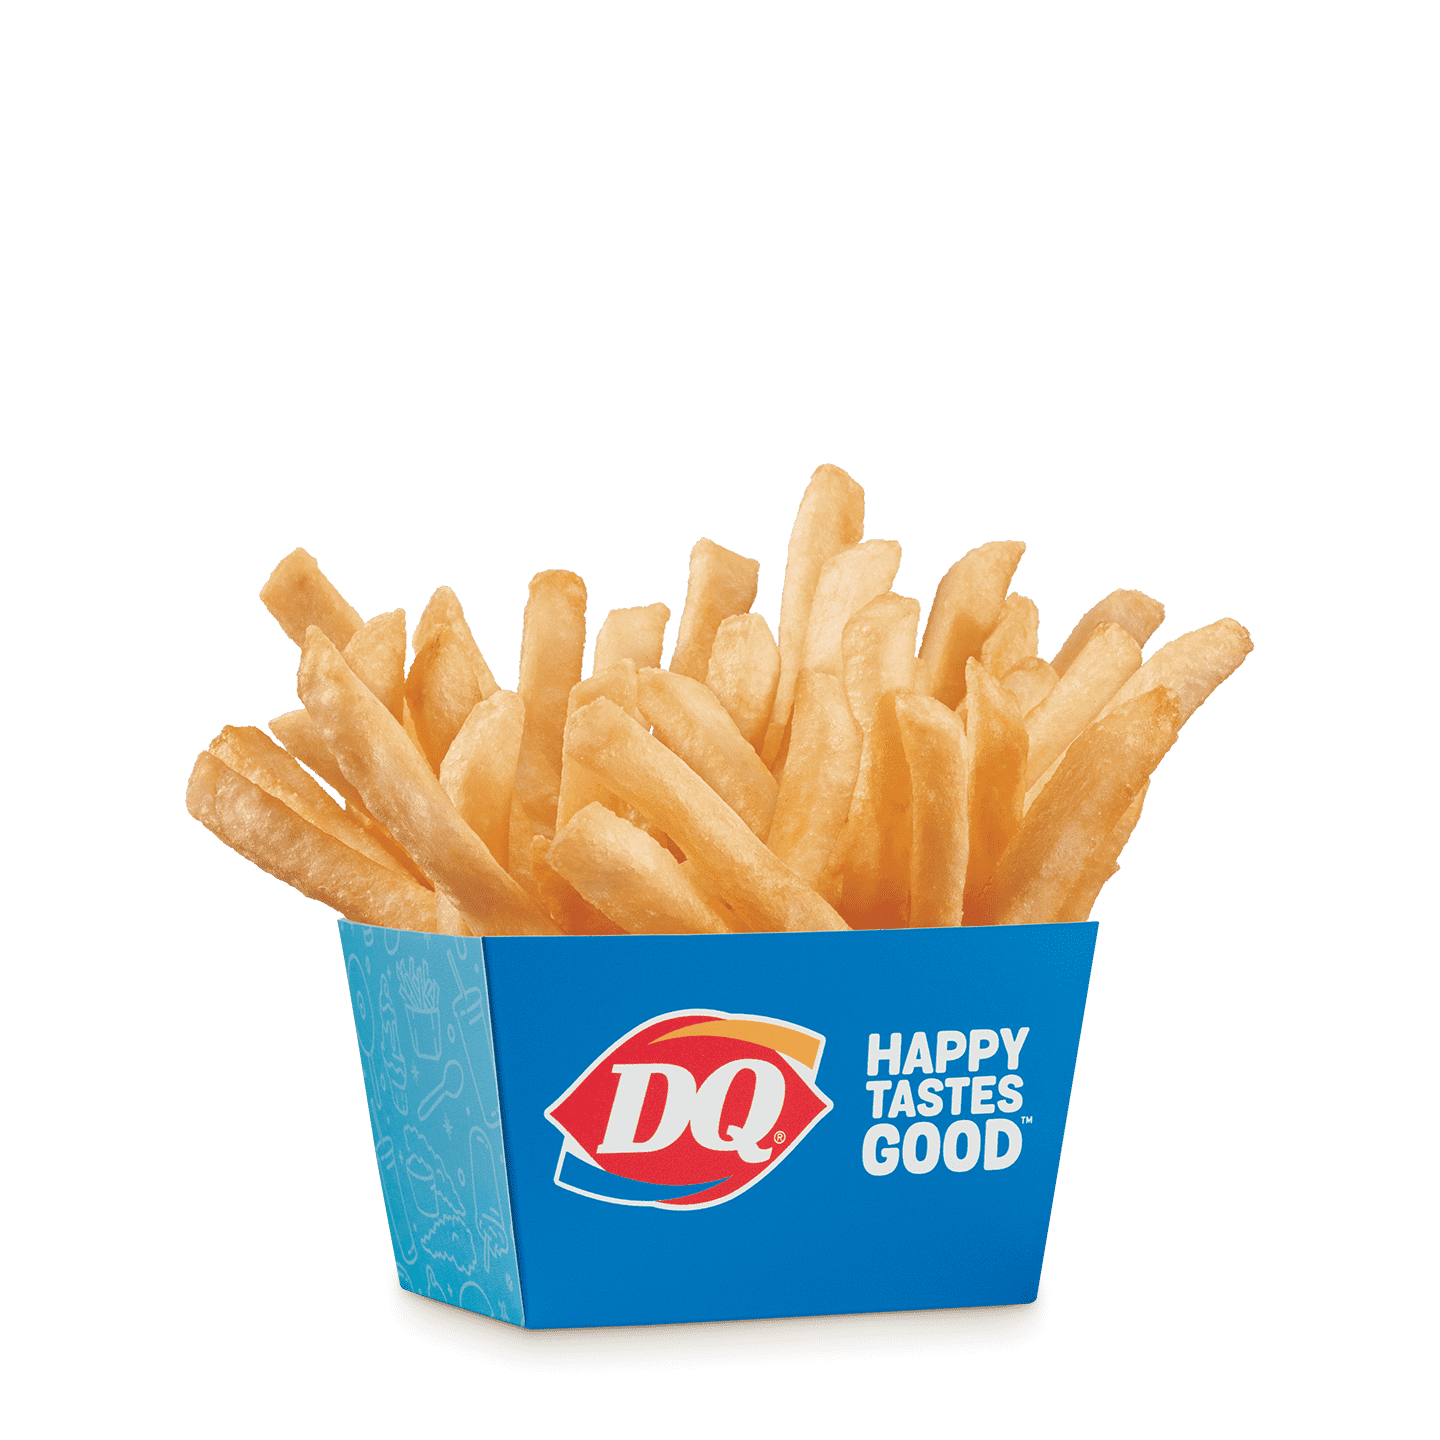 French Fries Download Free PNG